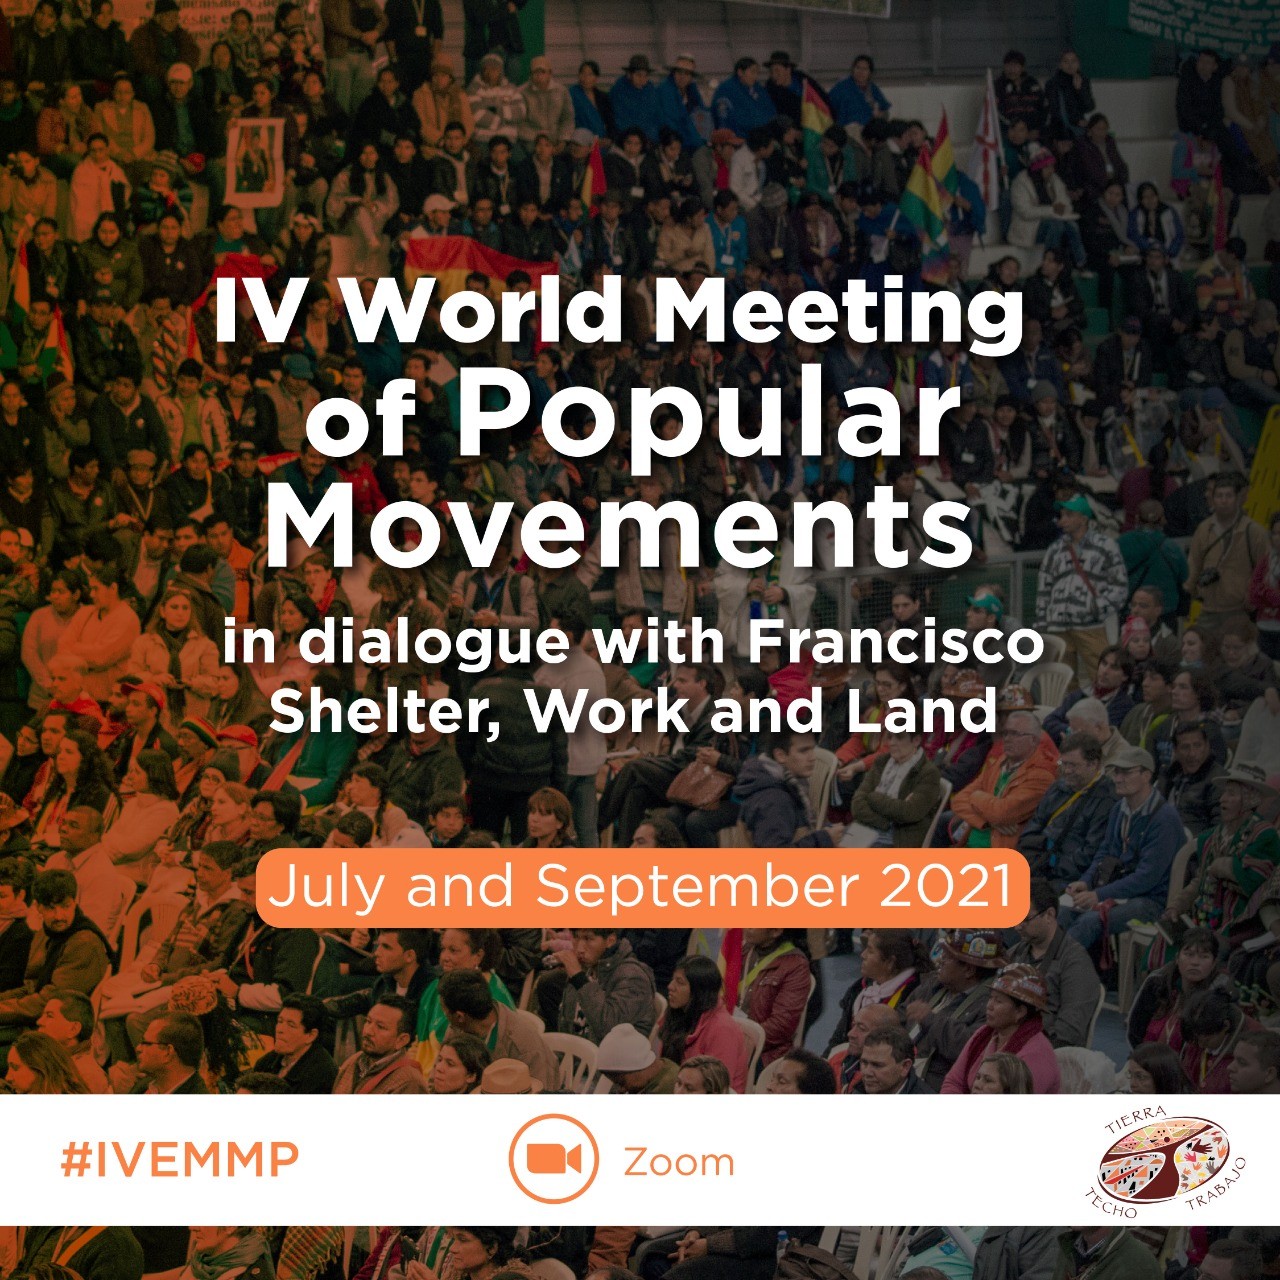 The popular movements reunite once more with Pope Francisco 